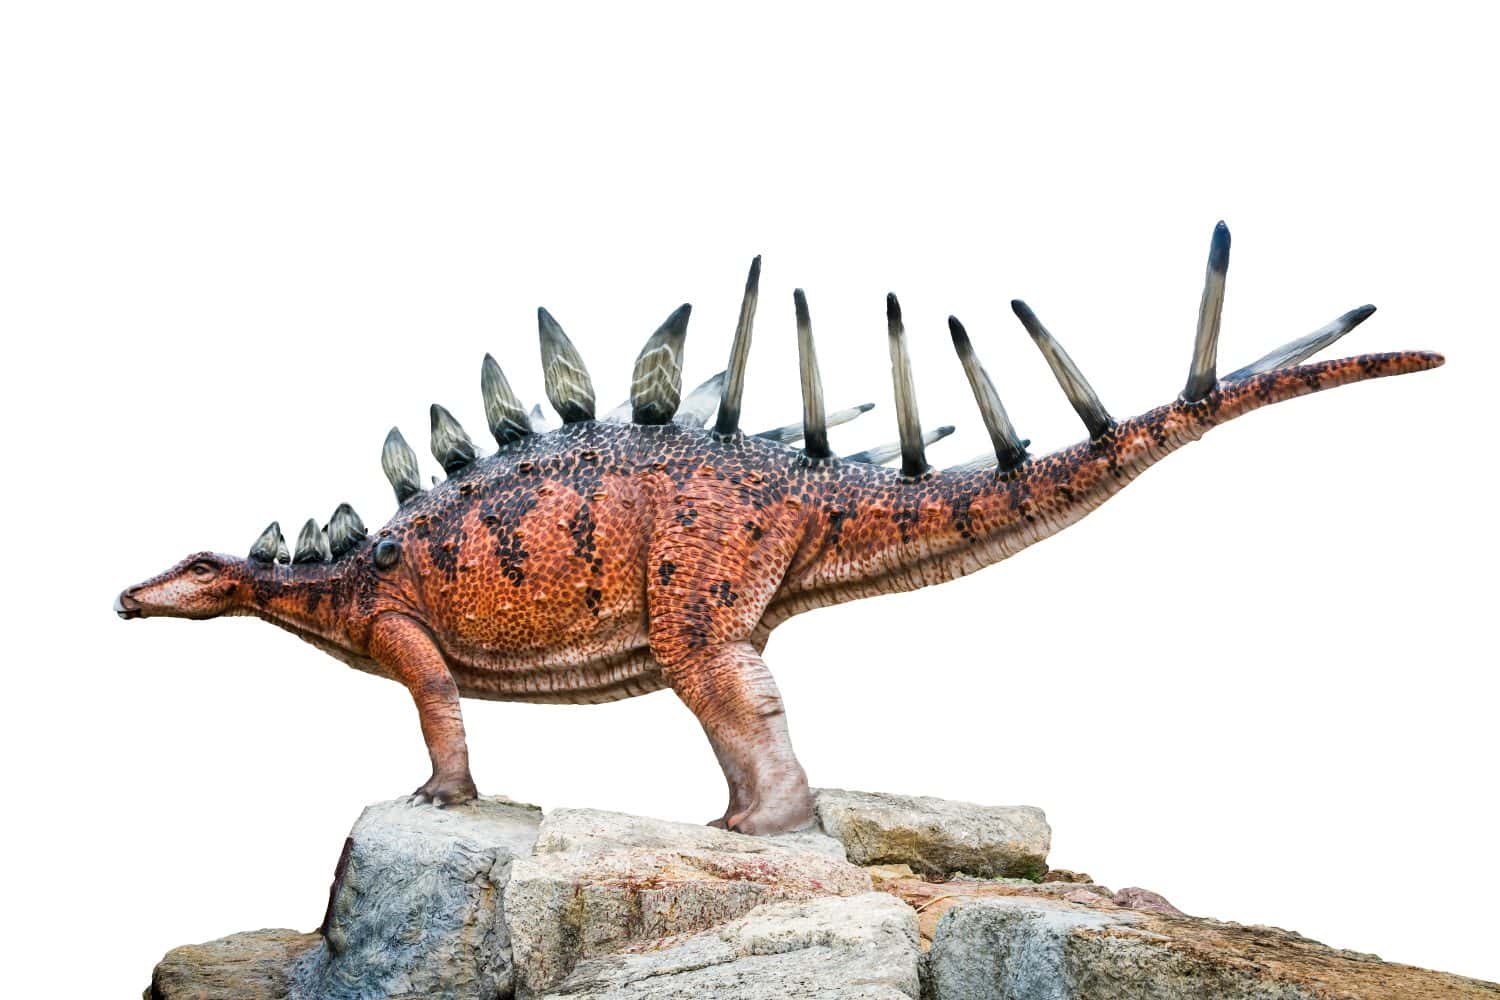 Kentrosaurus is a genus of stegosaurian dinosaur from the Late Jurassic of Tanzania, stand on the stone isolated on white background with clipping path